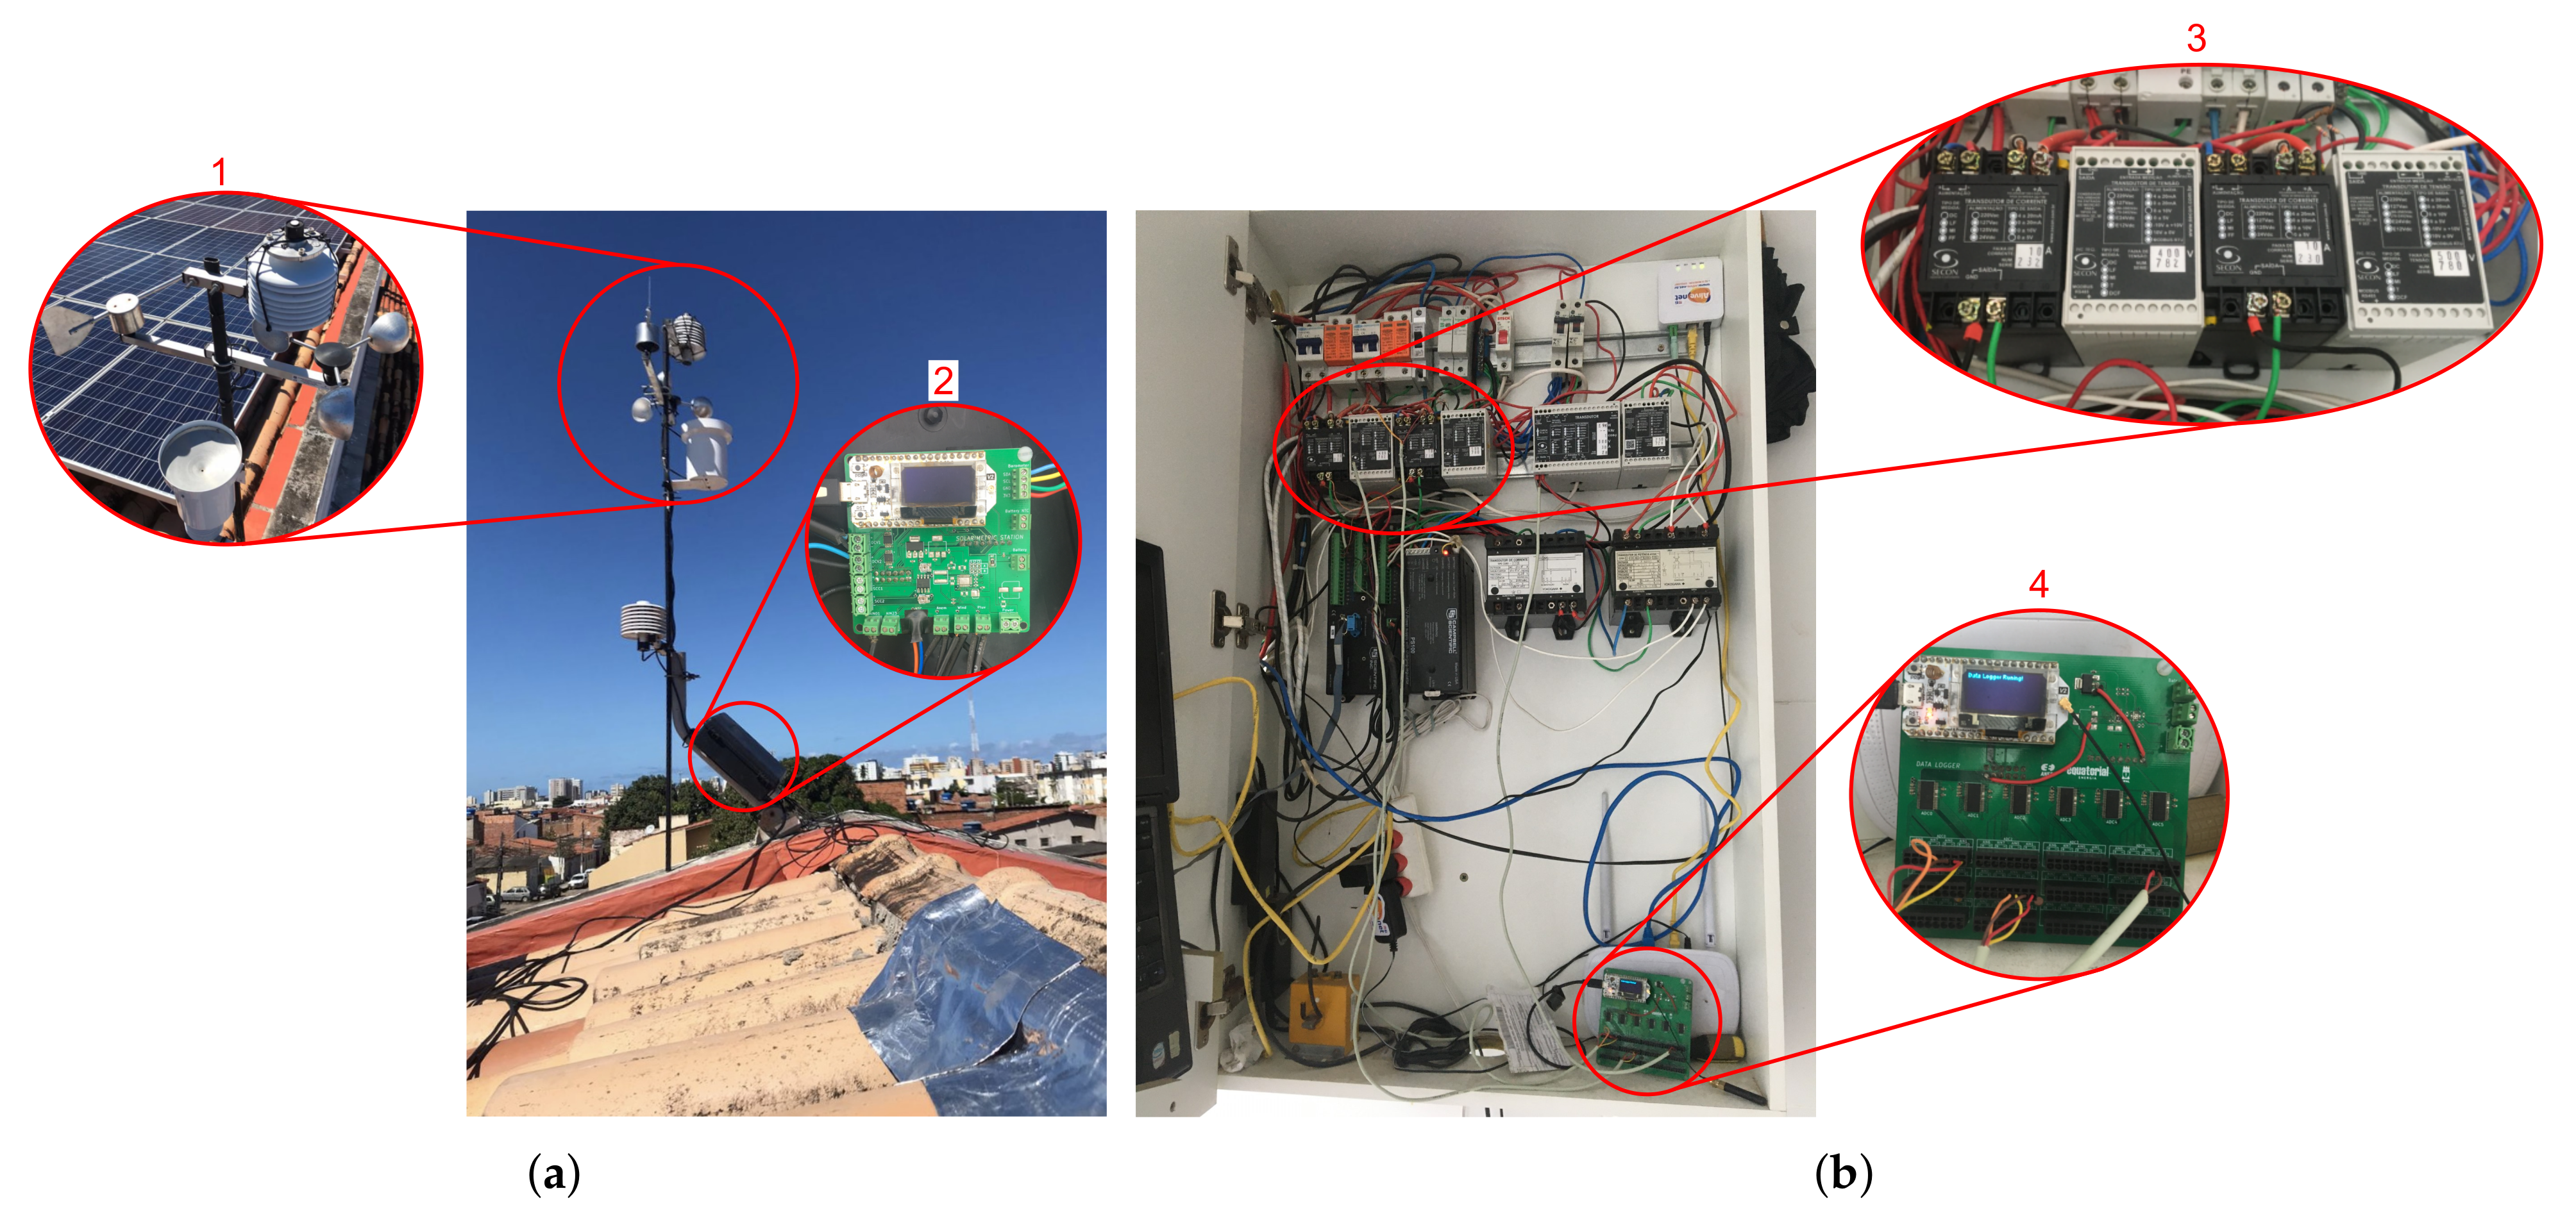 Sensors Free Full Text A Low Cost Iot System For Real Time Monitoring Of Climatic Variables And Photovoltaic Generation For Smart Grid Application Html